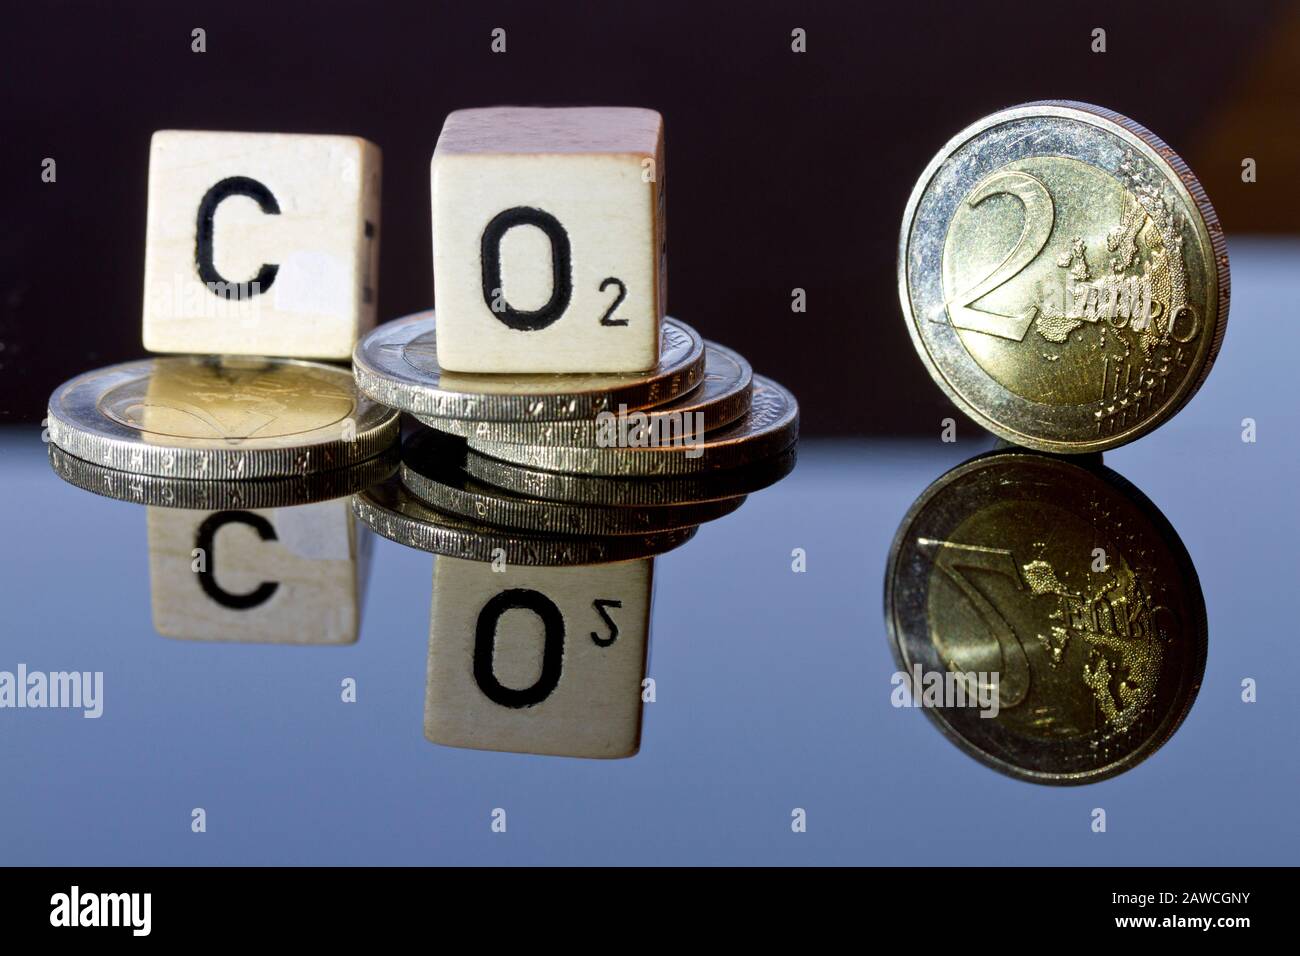 CO2-Abgabe und CO2-Steuer, CO2-certificates symbolized by money, letters and reflexion refexions Stock Photo